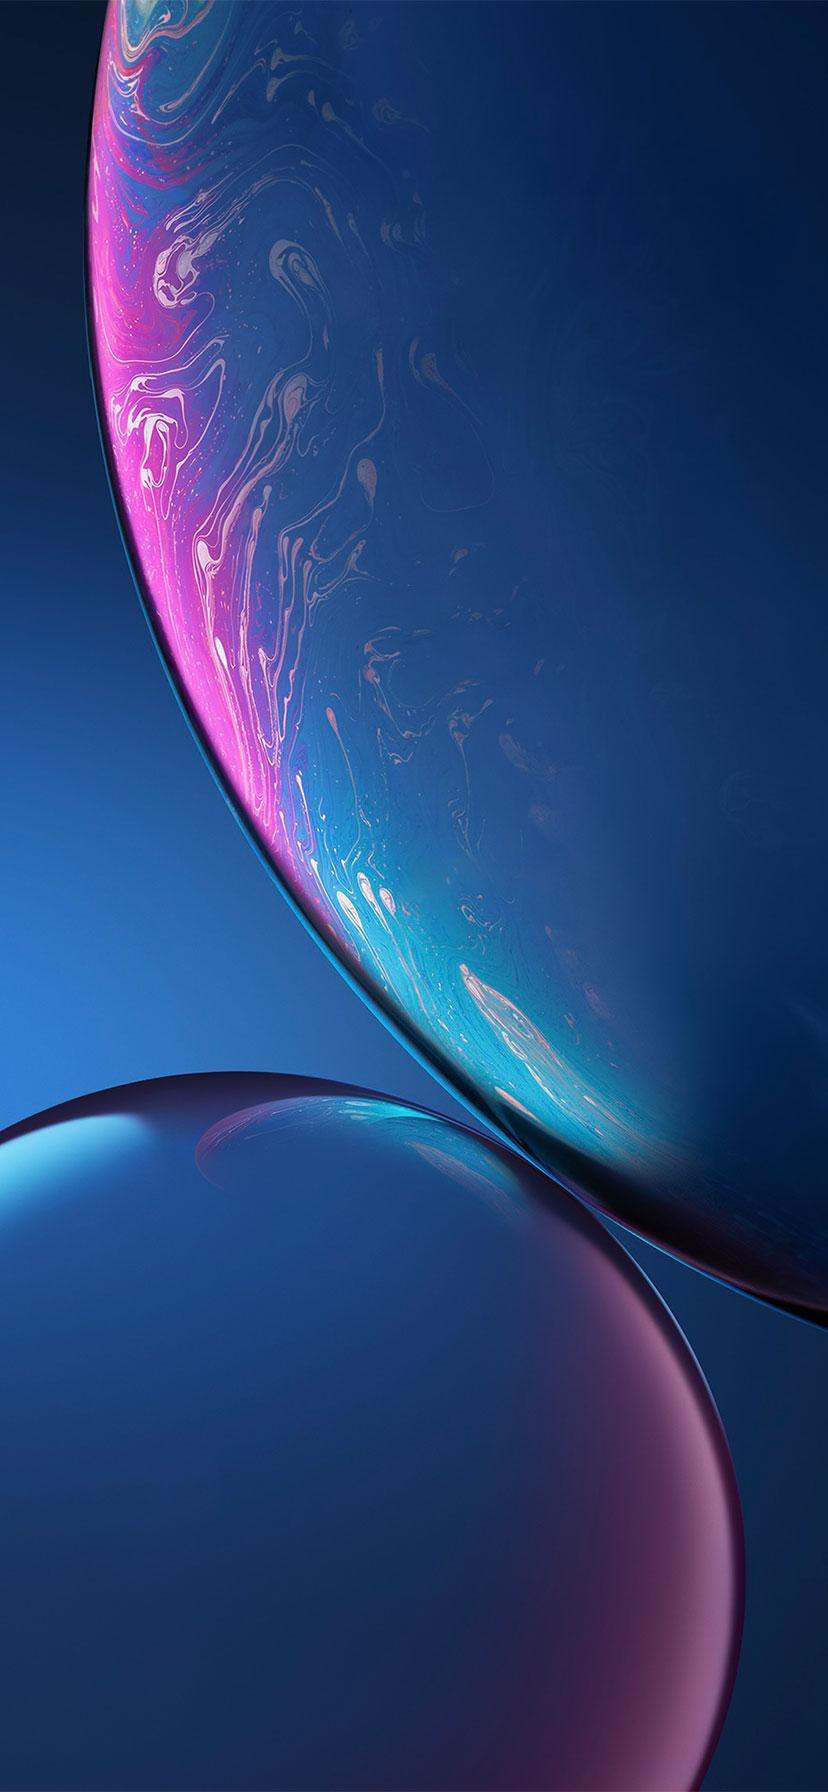 58+] iPhone XR HD Wallpapers